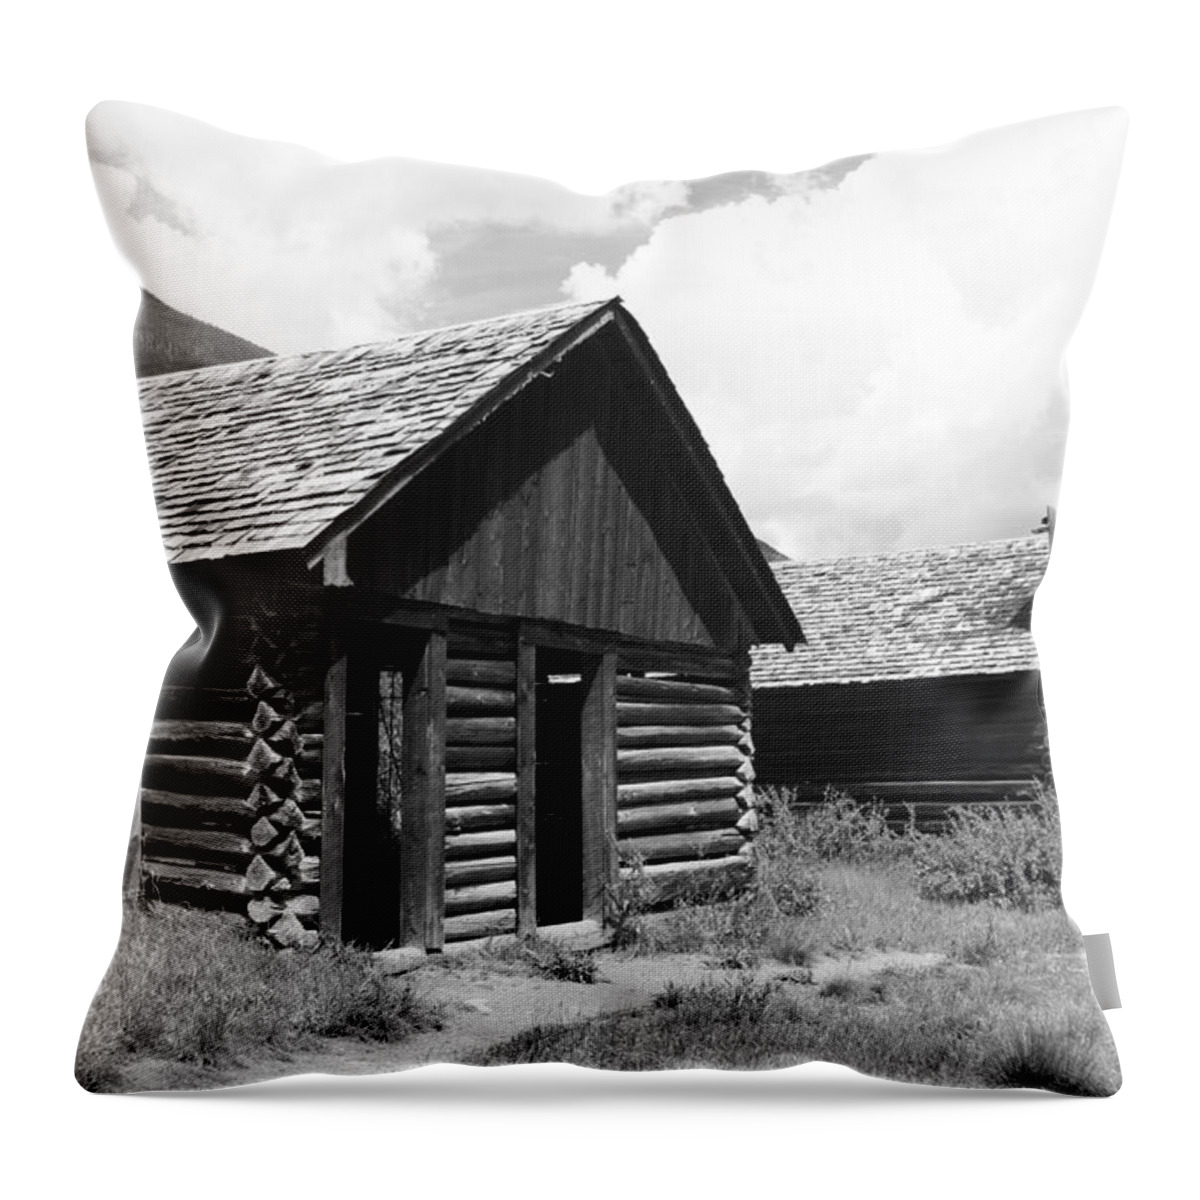 Landscapes Throw Pillow featuring the photograph Ashcroft Ghost Town by Eric Glaser